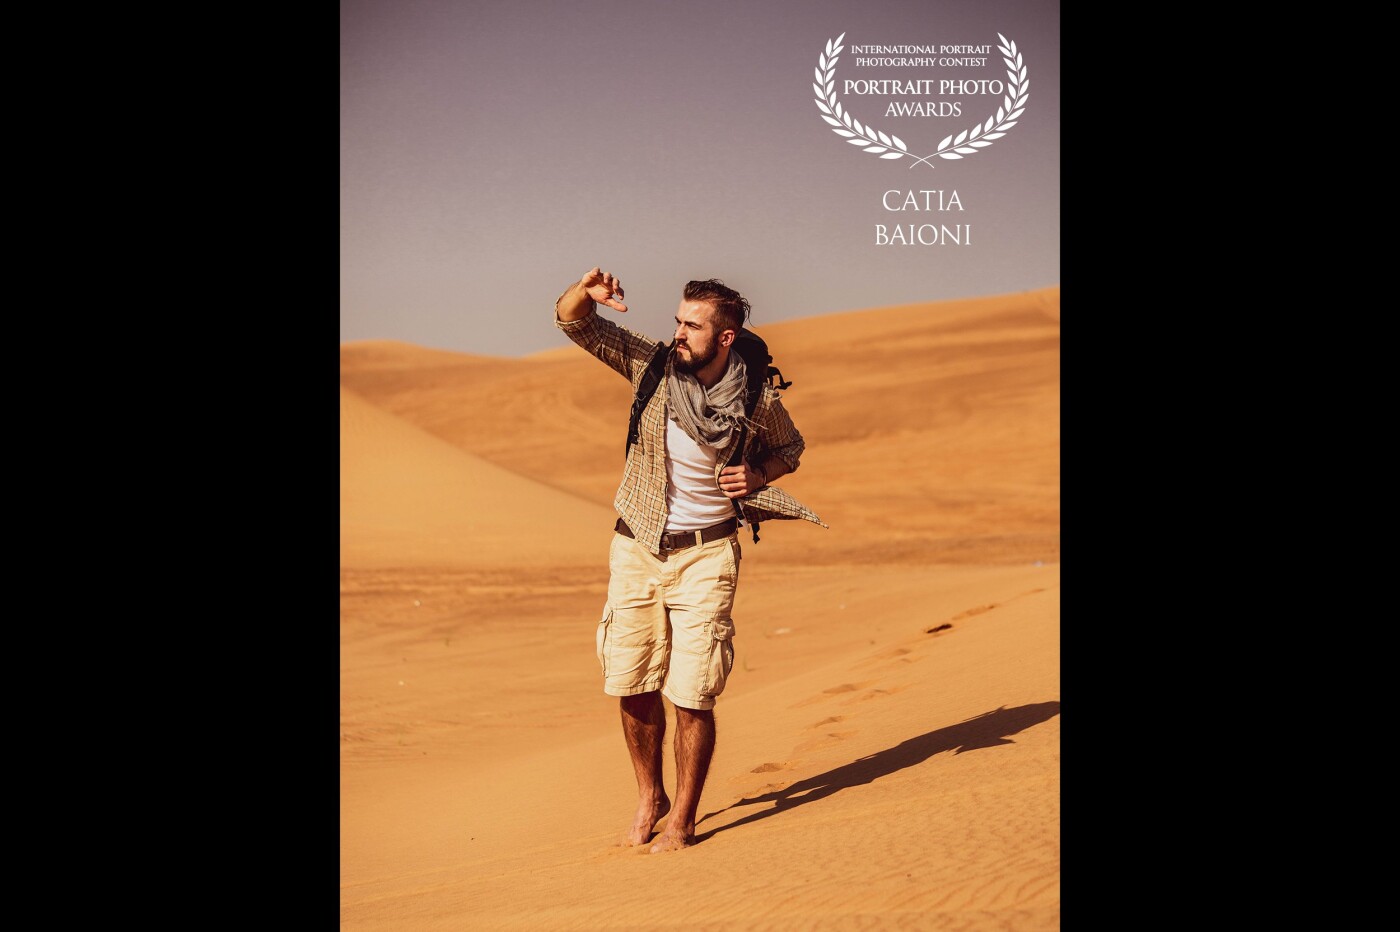 Two years ago, I went to Dubai with Calvin Hollywood and his team to attend a workshop. On the way to the desert there was a shoot with Kristof.